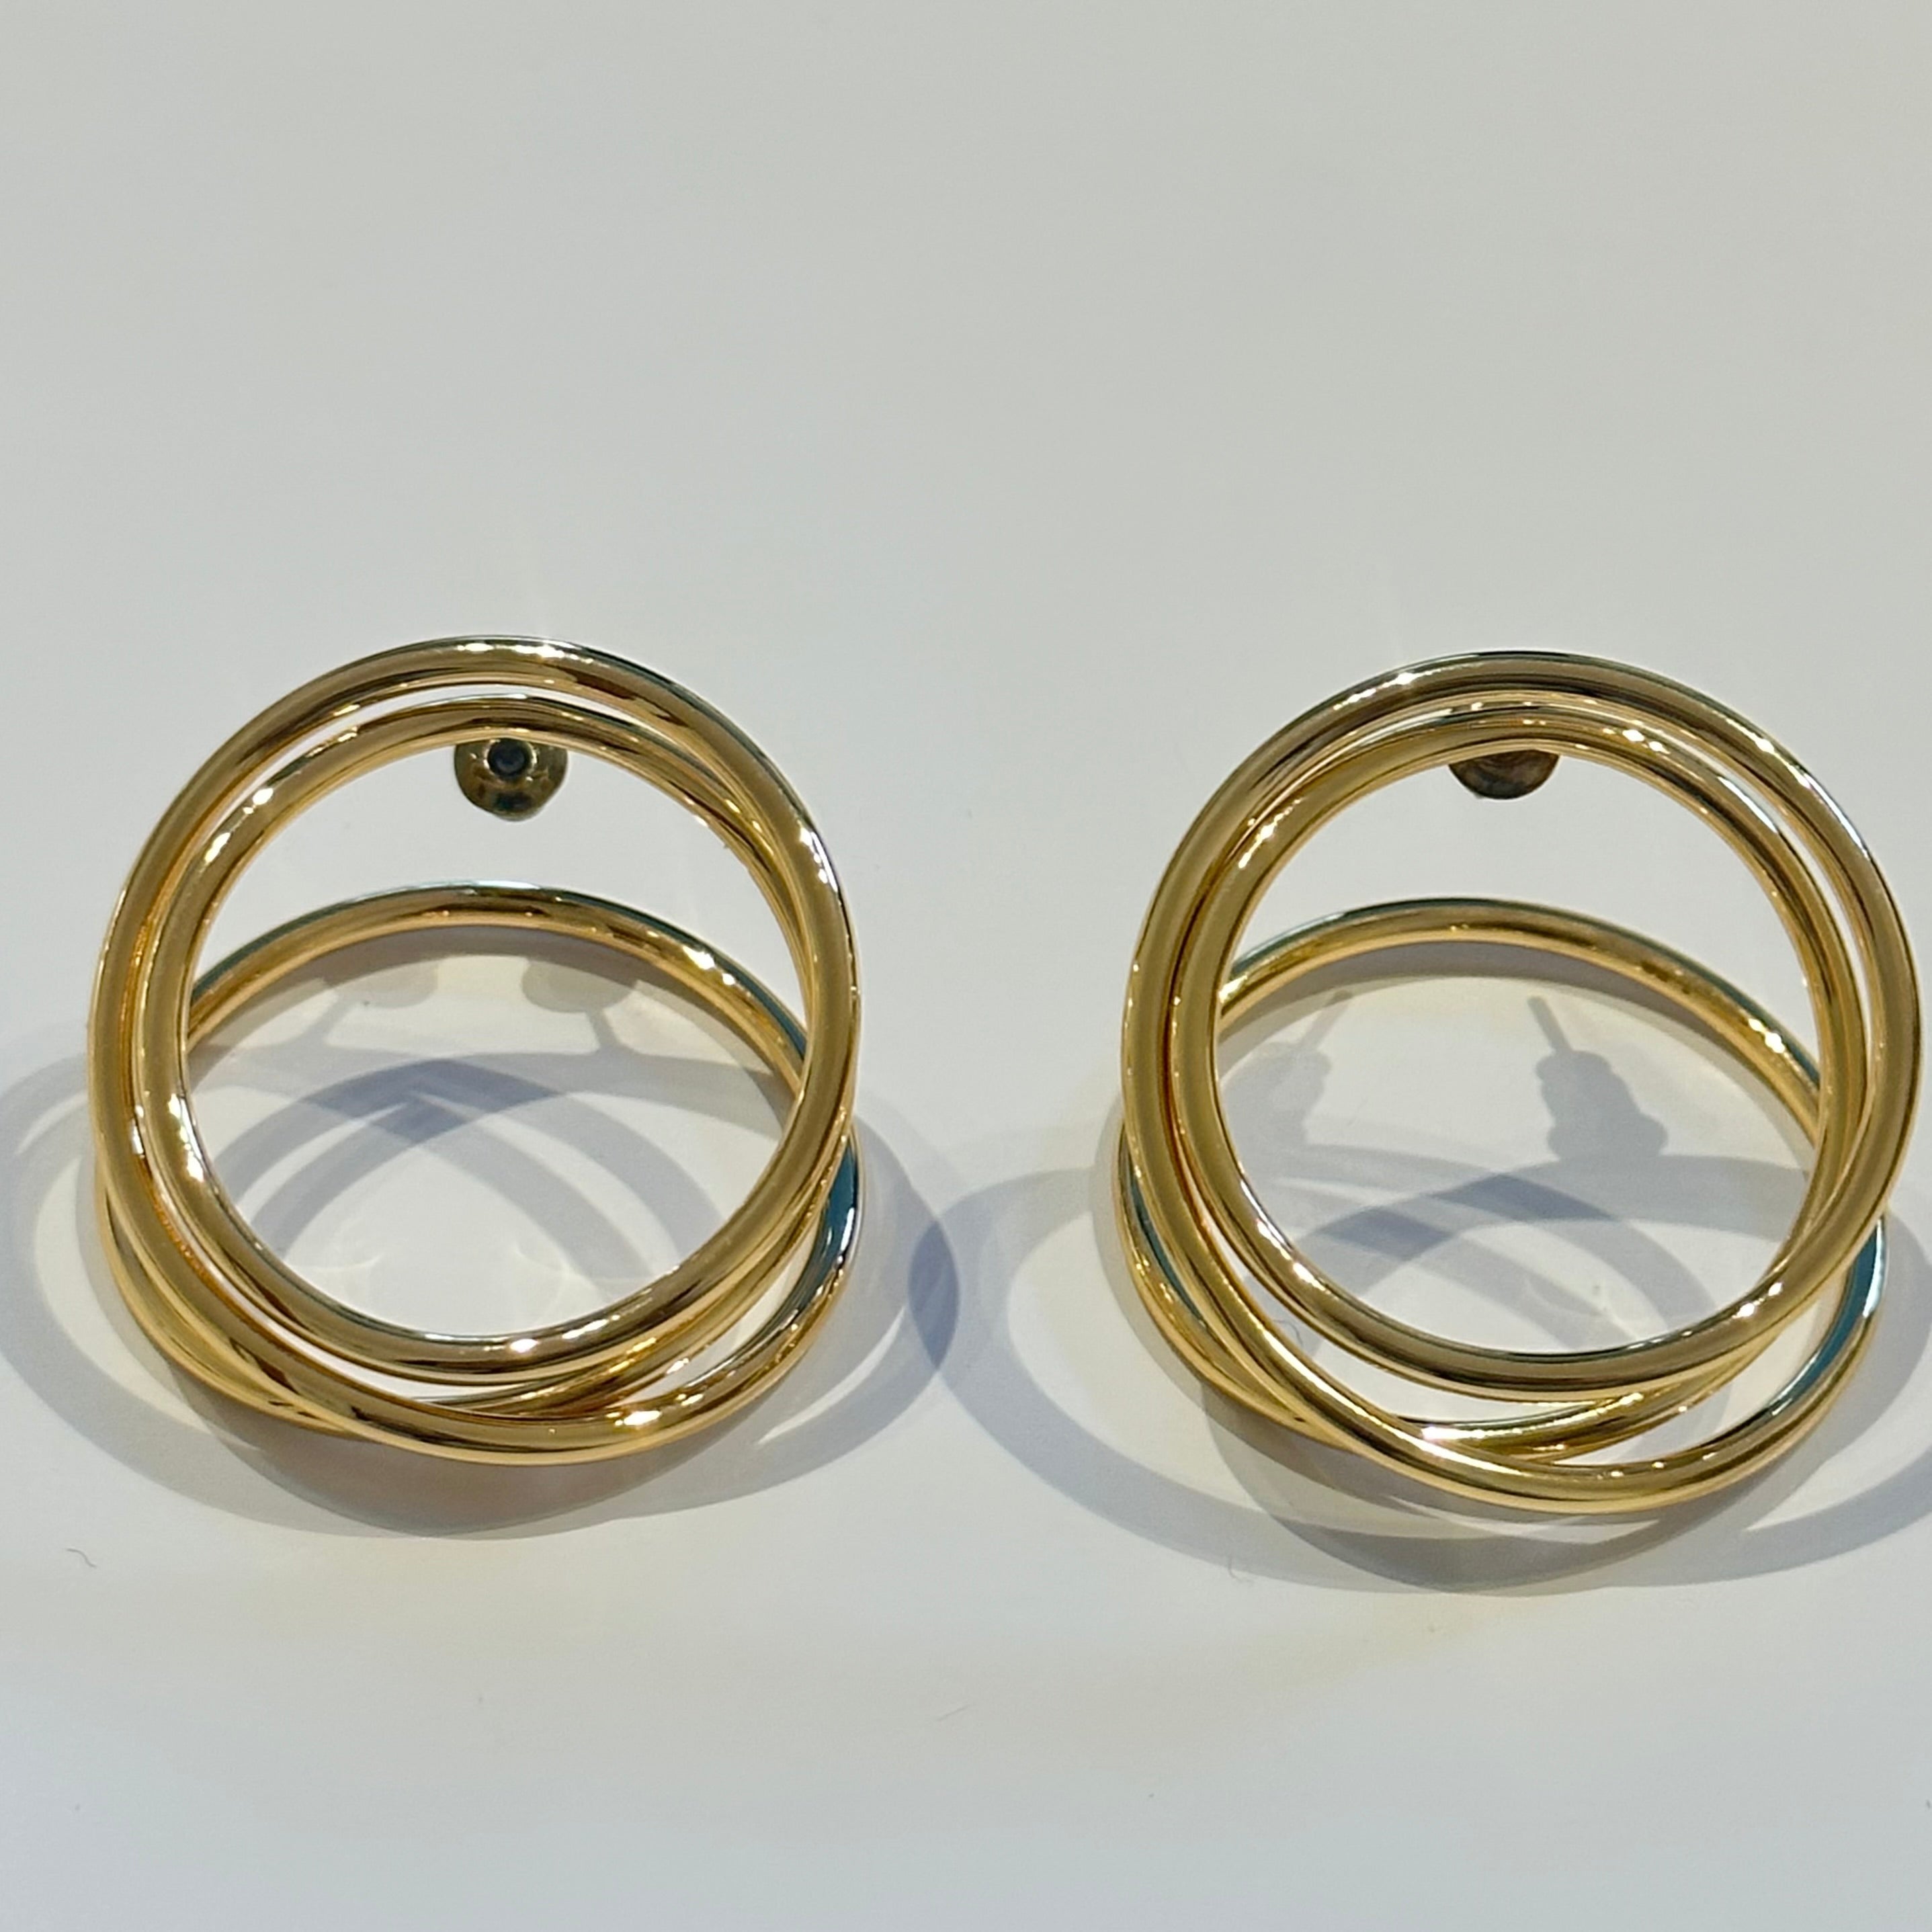 Round Spiral Double Hoop Style Large Studs in 18k Gold Plated Brass - The Midori Earrings